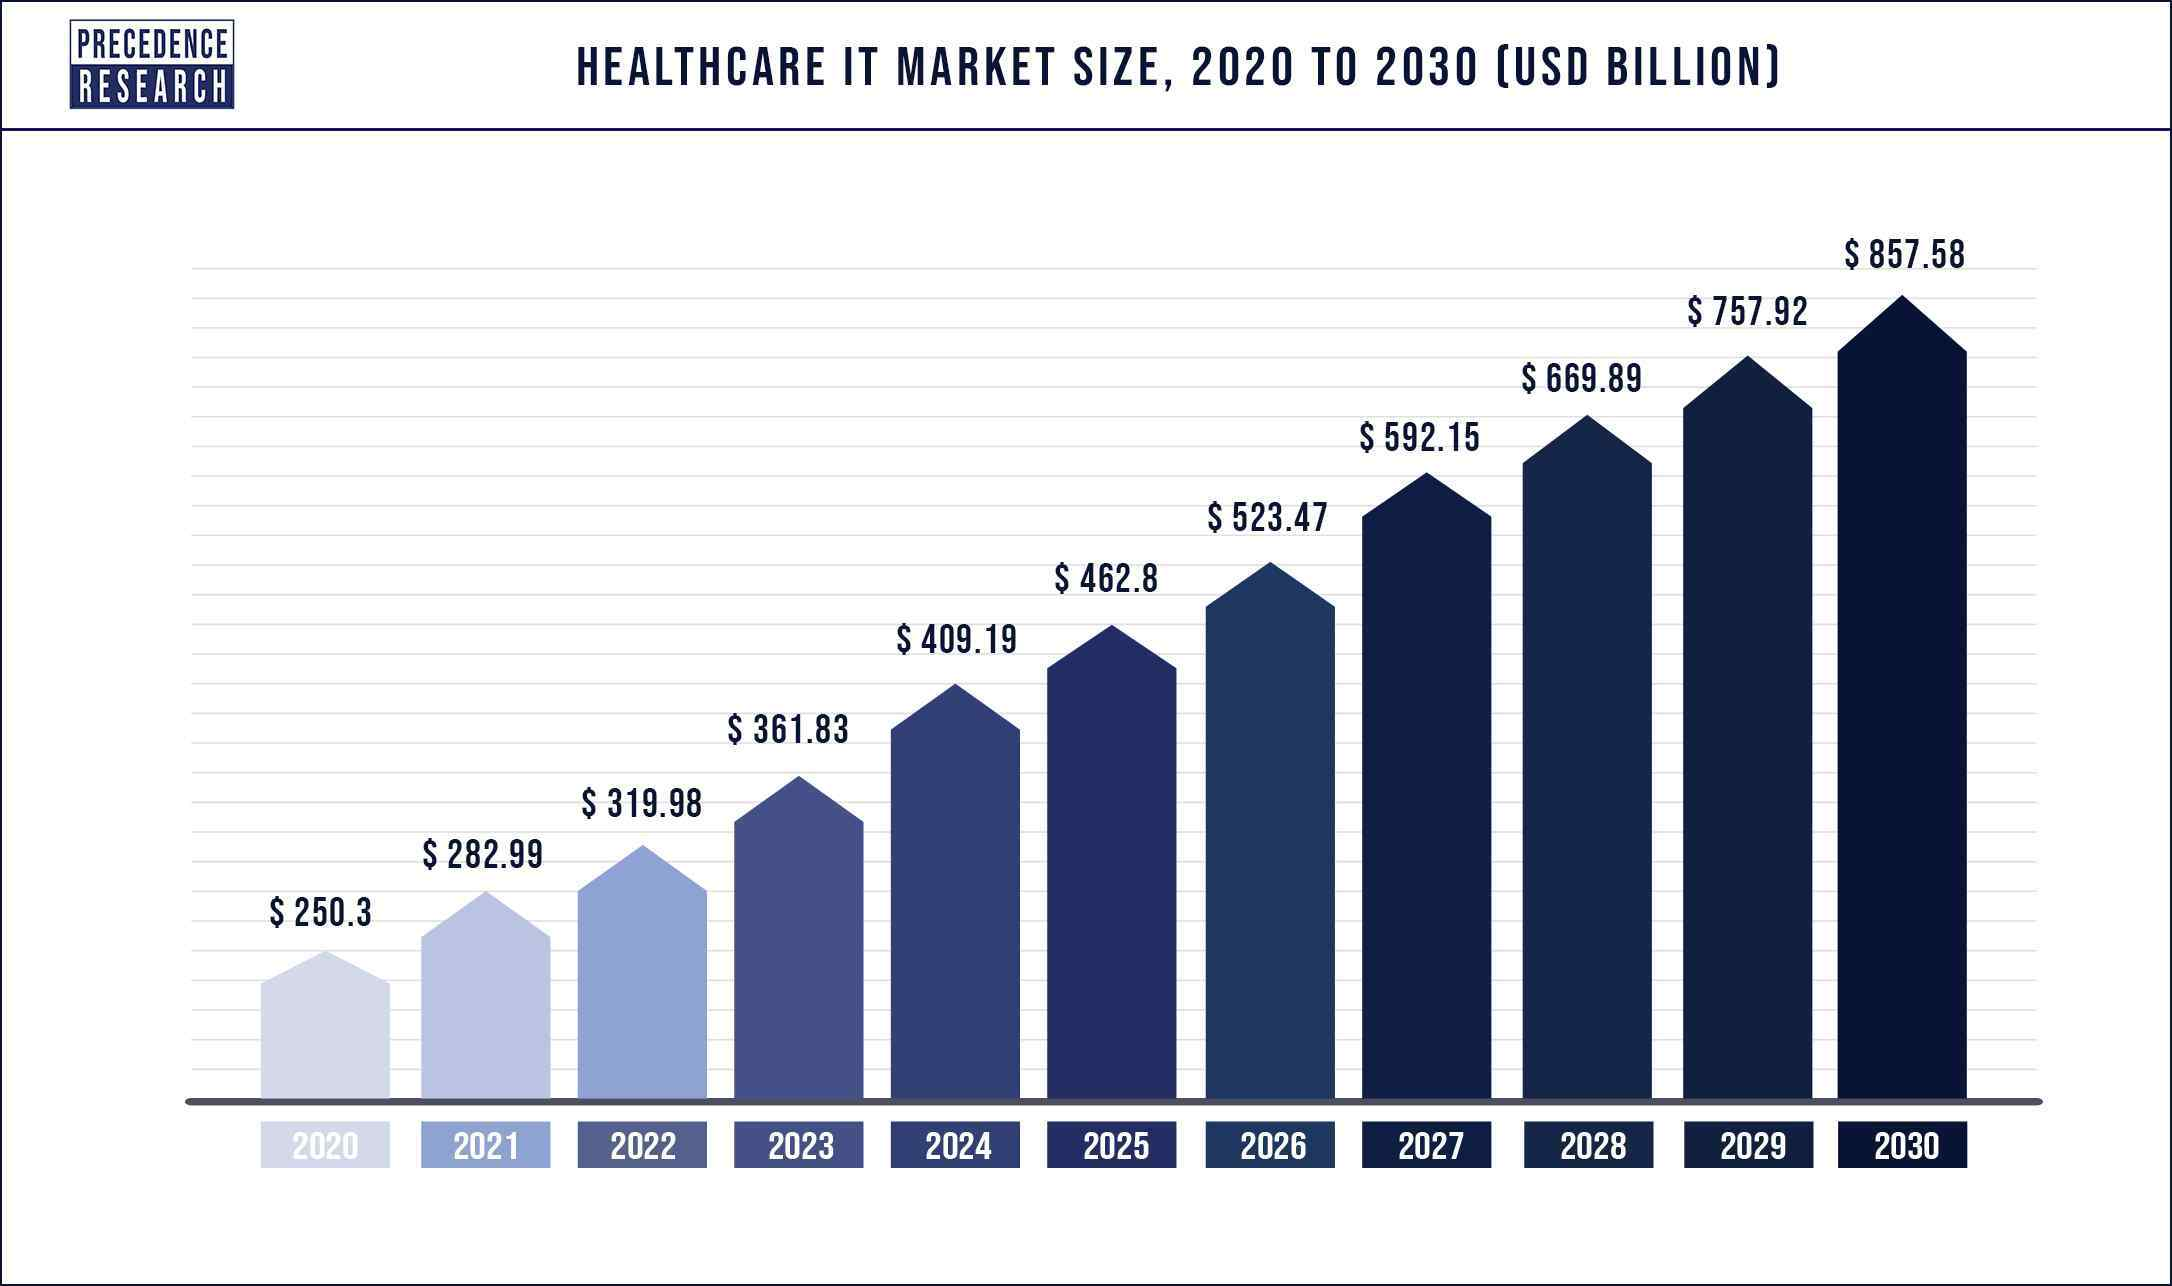 Healthcare IT Market Size 2020 to 2030